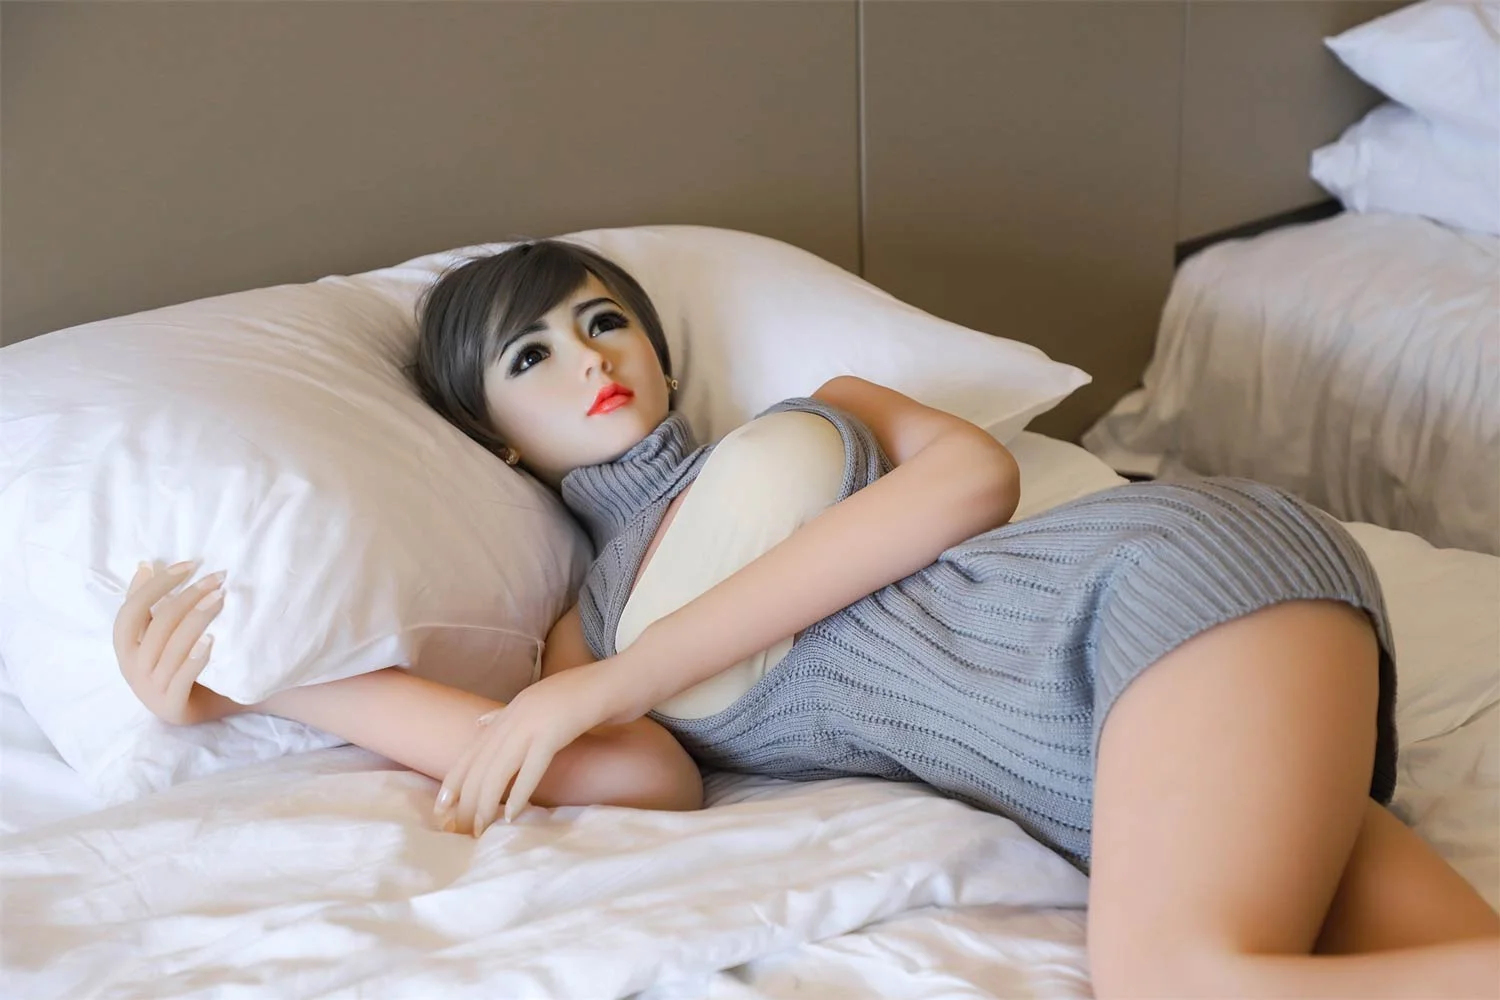 Silicone sex doll holding pillow